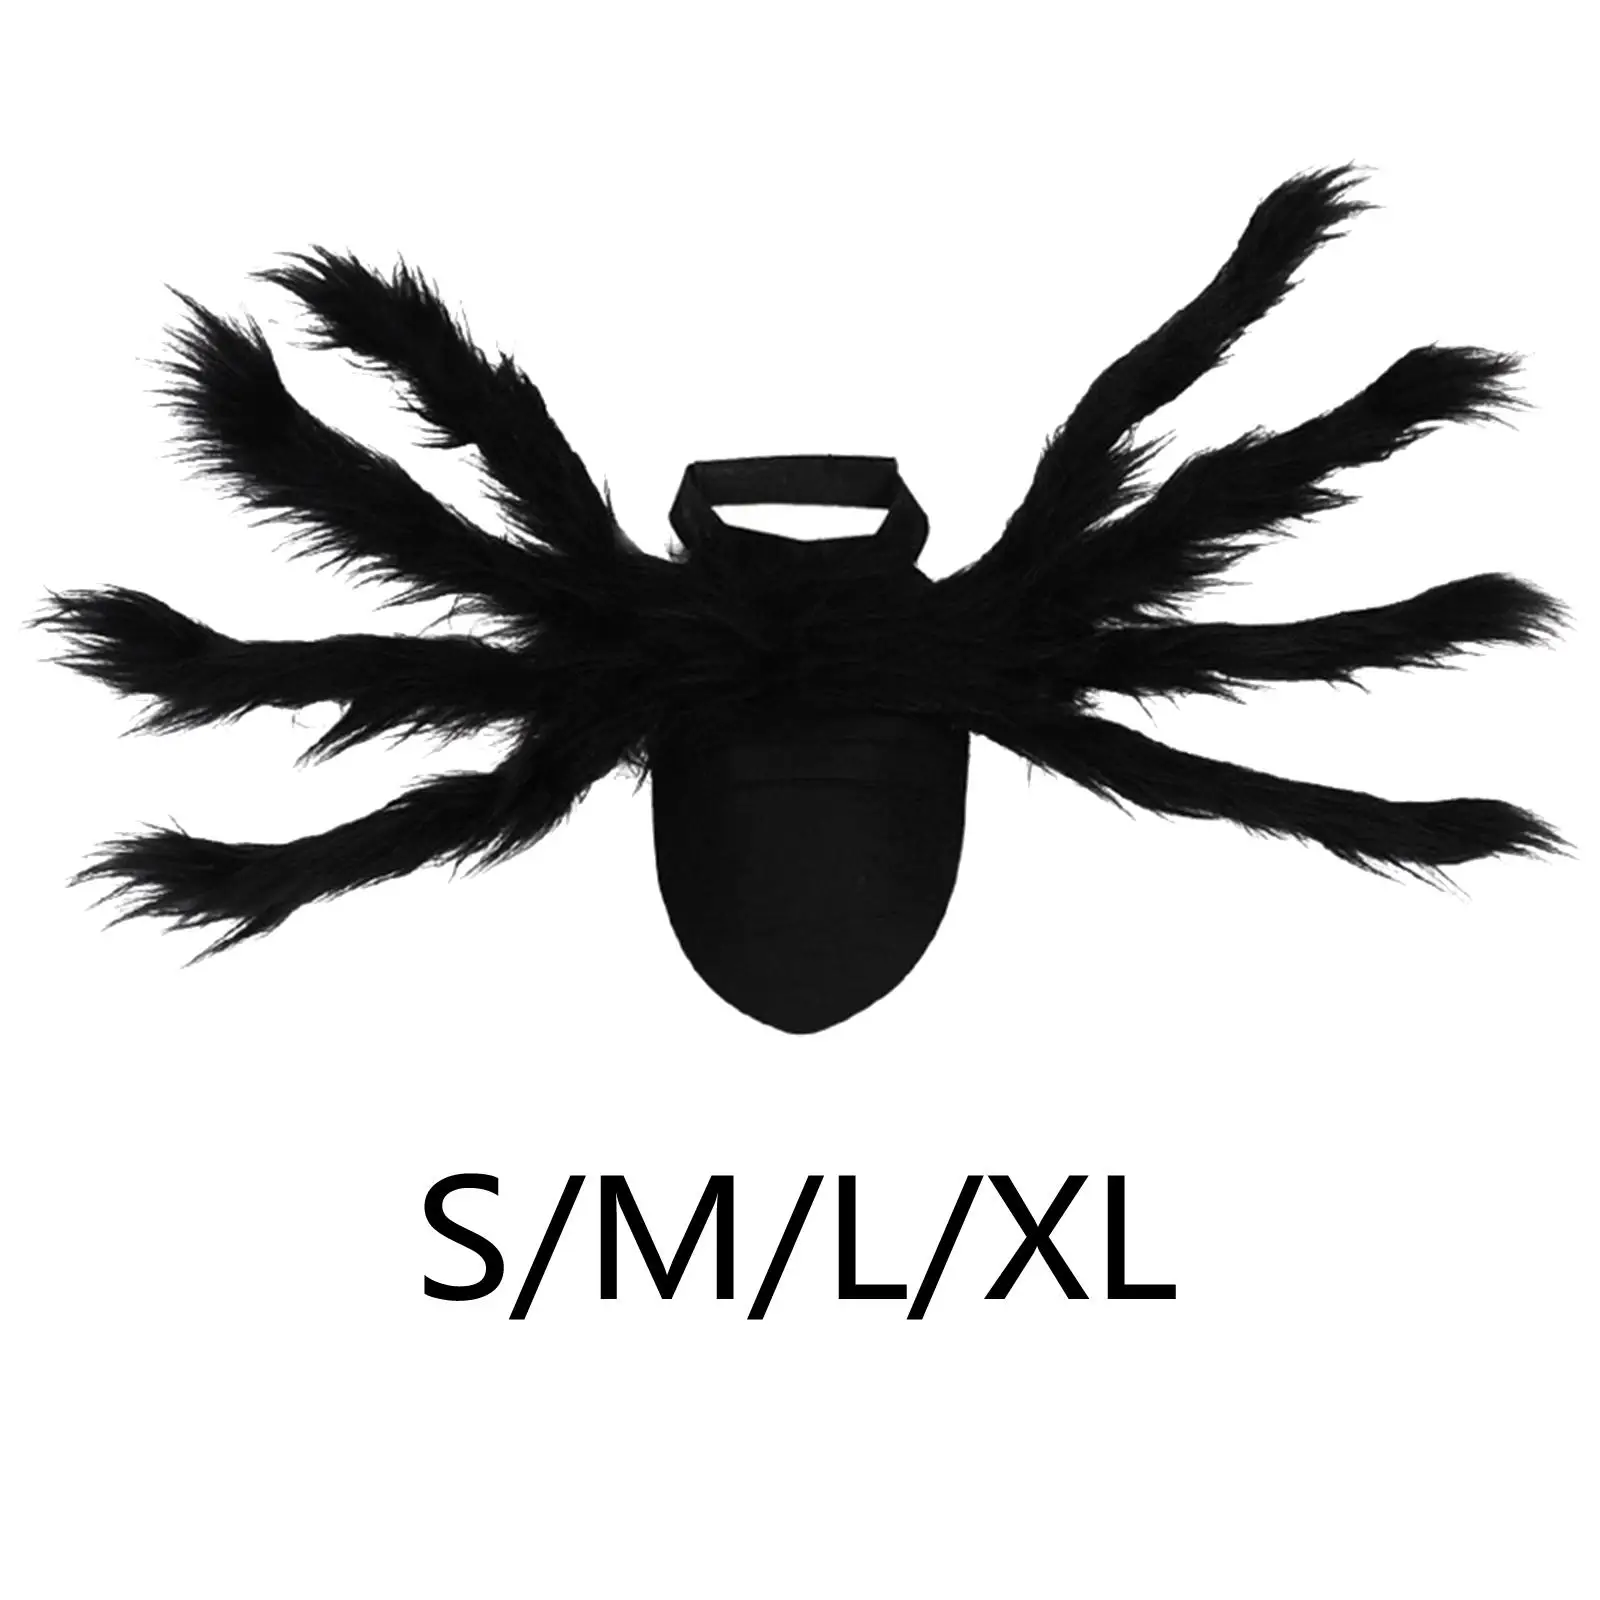 Spider Dog Costume Funny Black Decoration Spider Wing Dress up Accessories Pet Costume for Festival Holiday Halloween Party Dogs